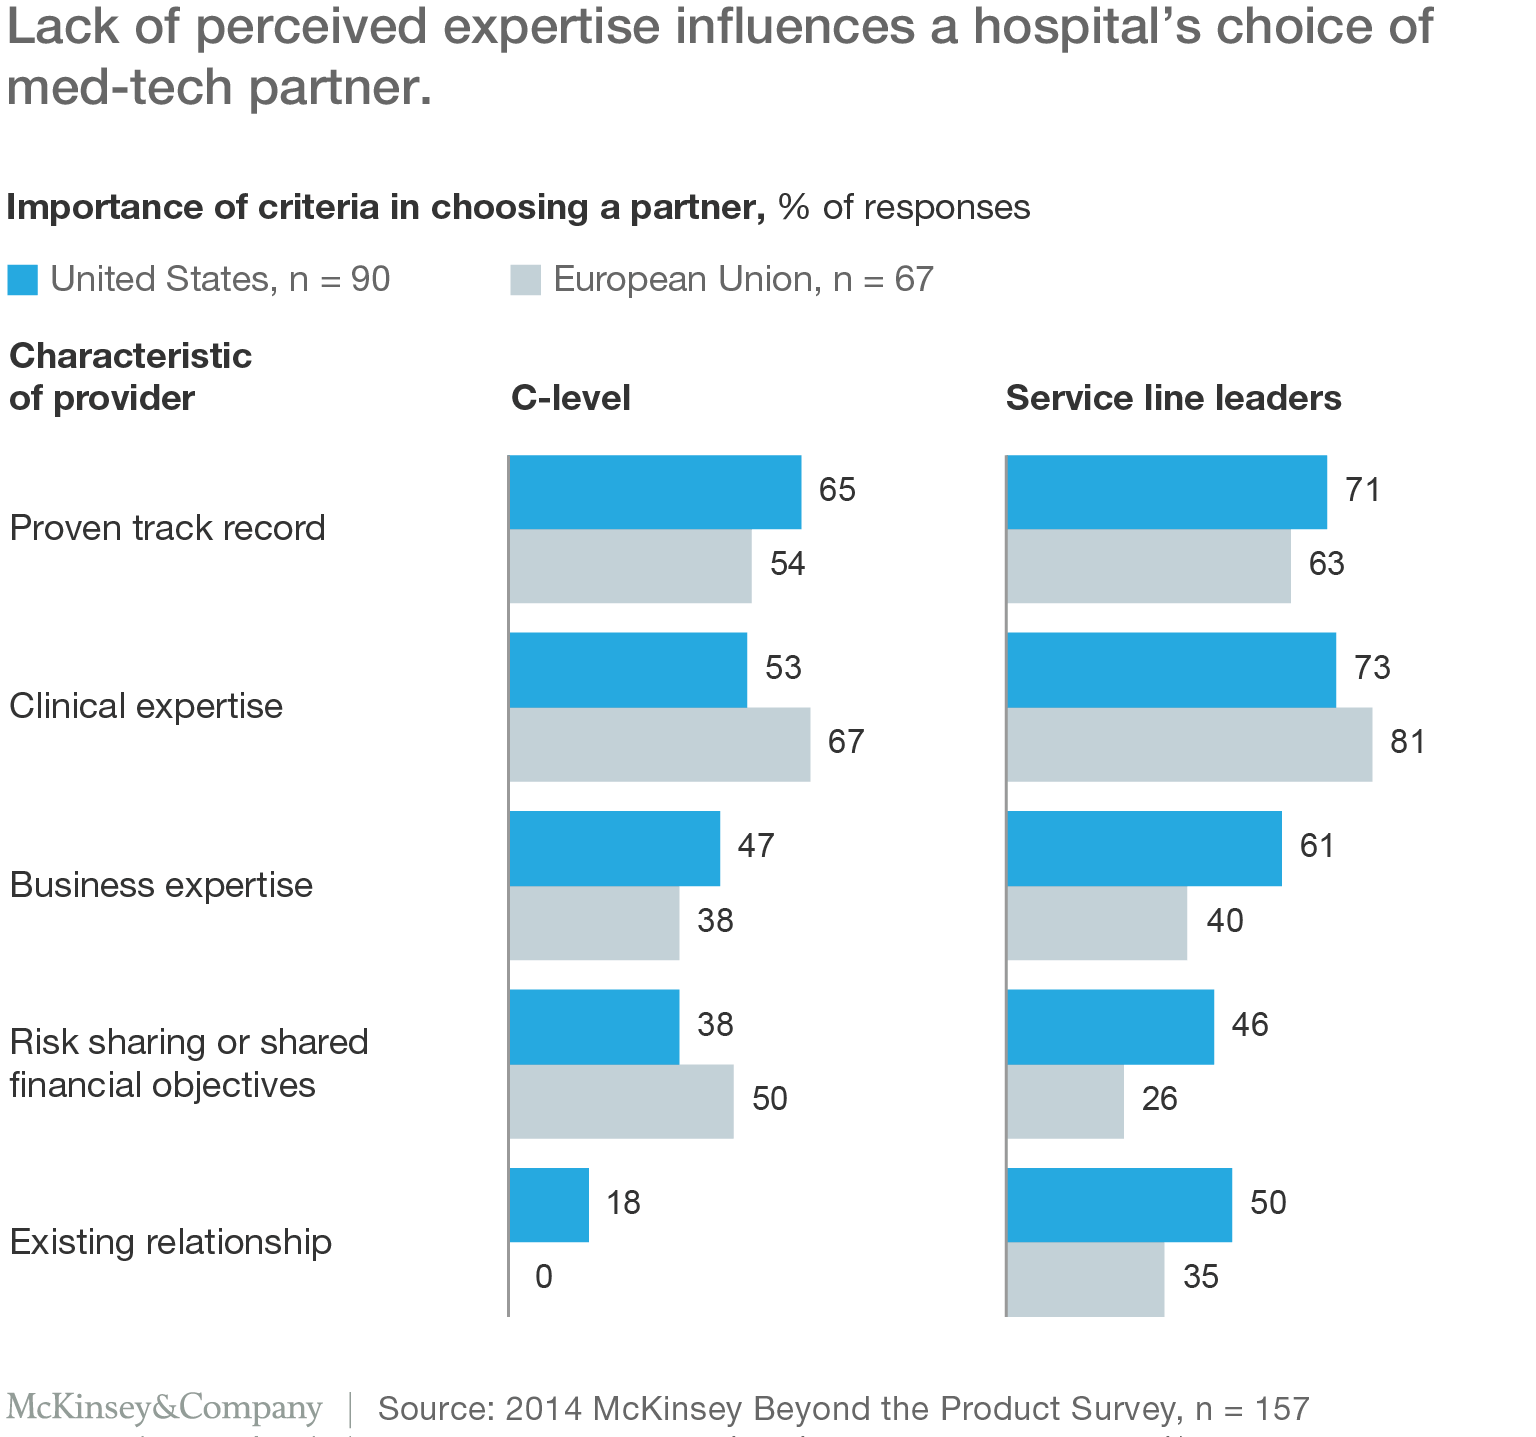 Lack of perceived expertise inuences a hospital’s choice of med-tech partner.